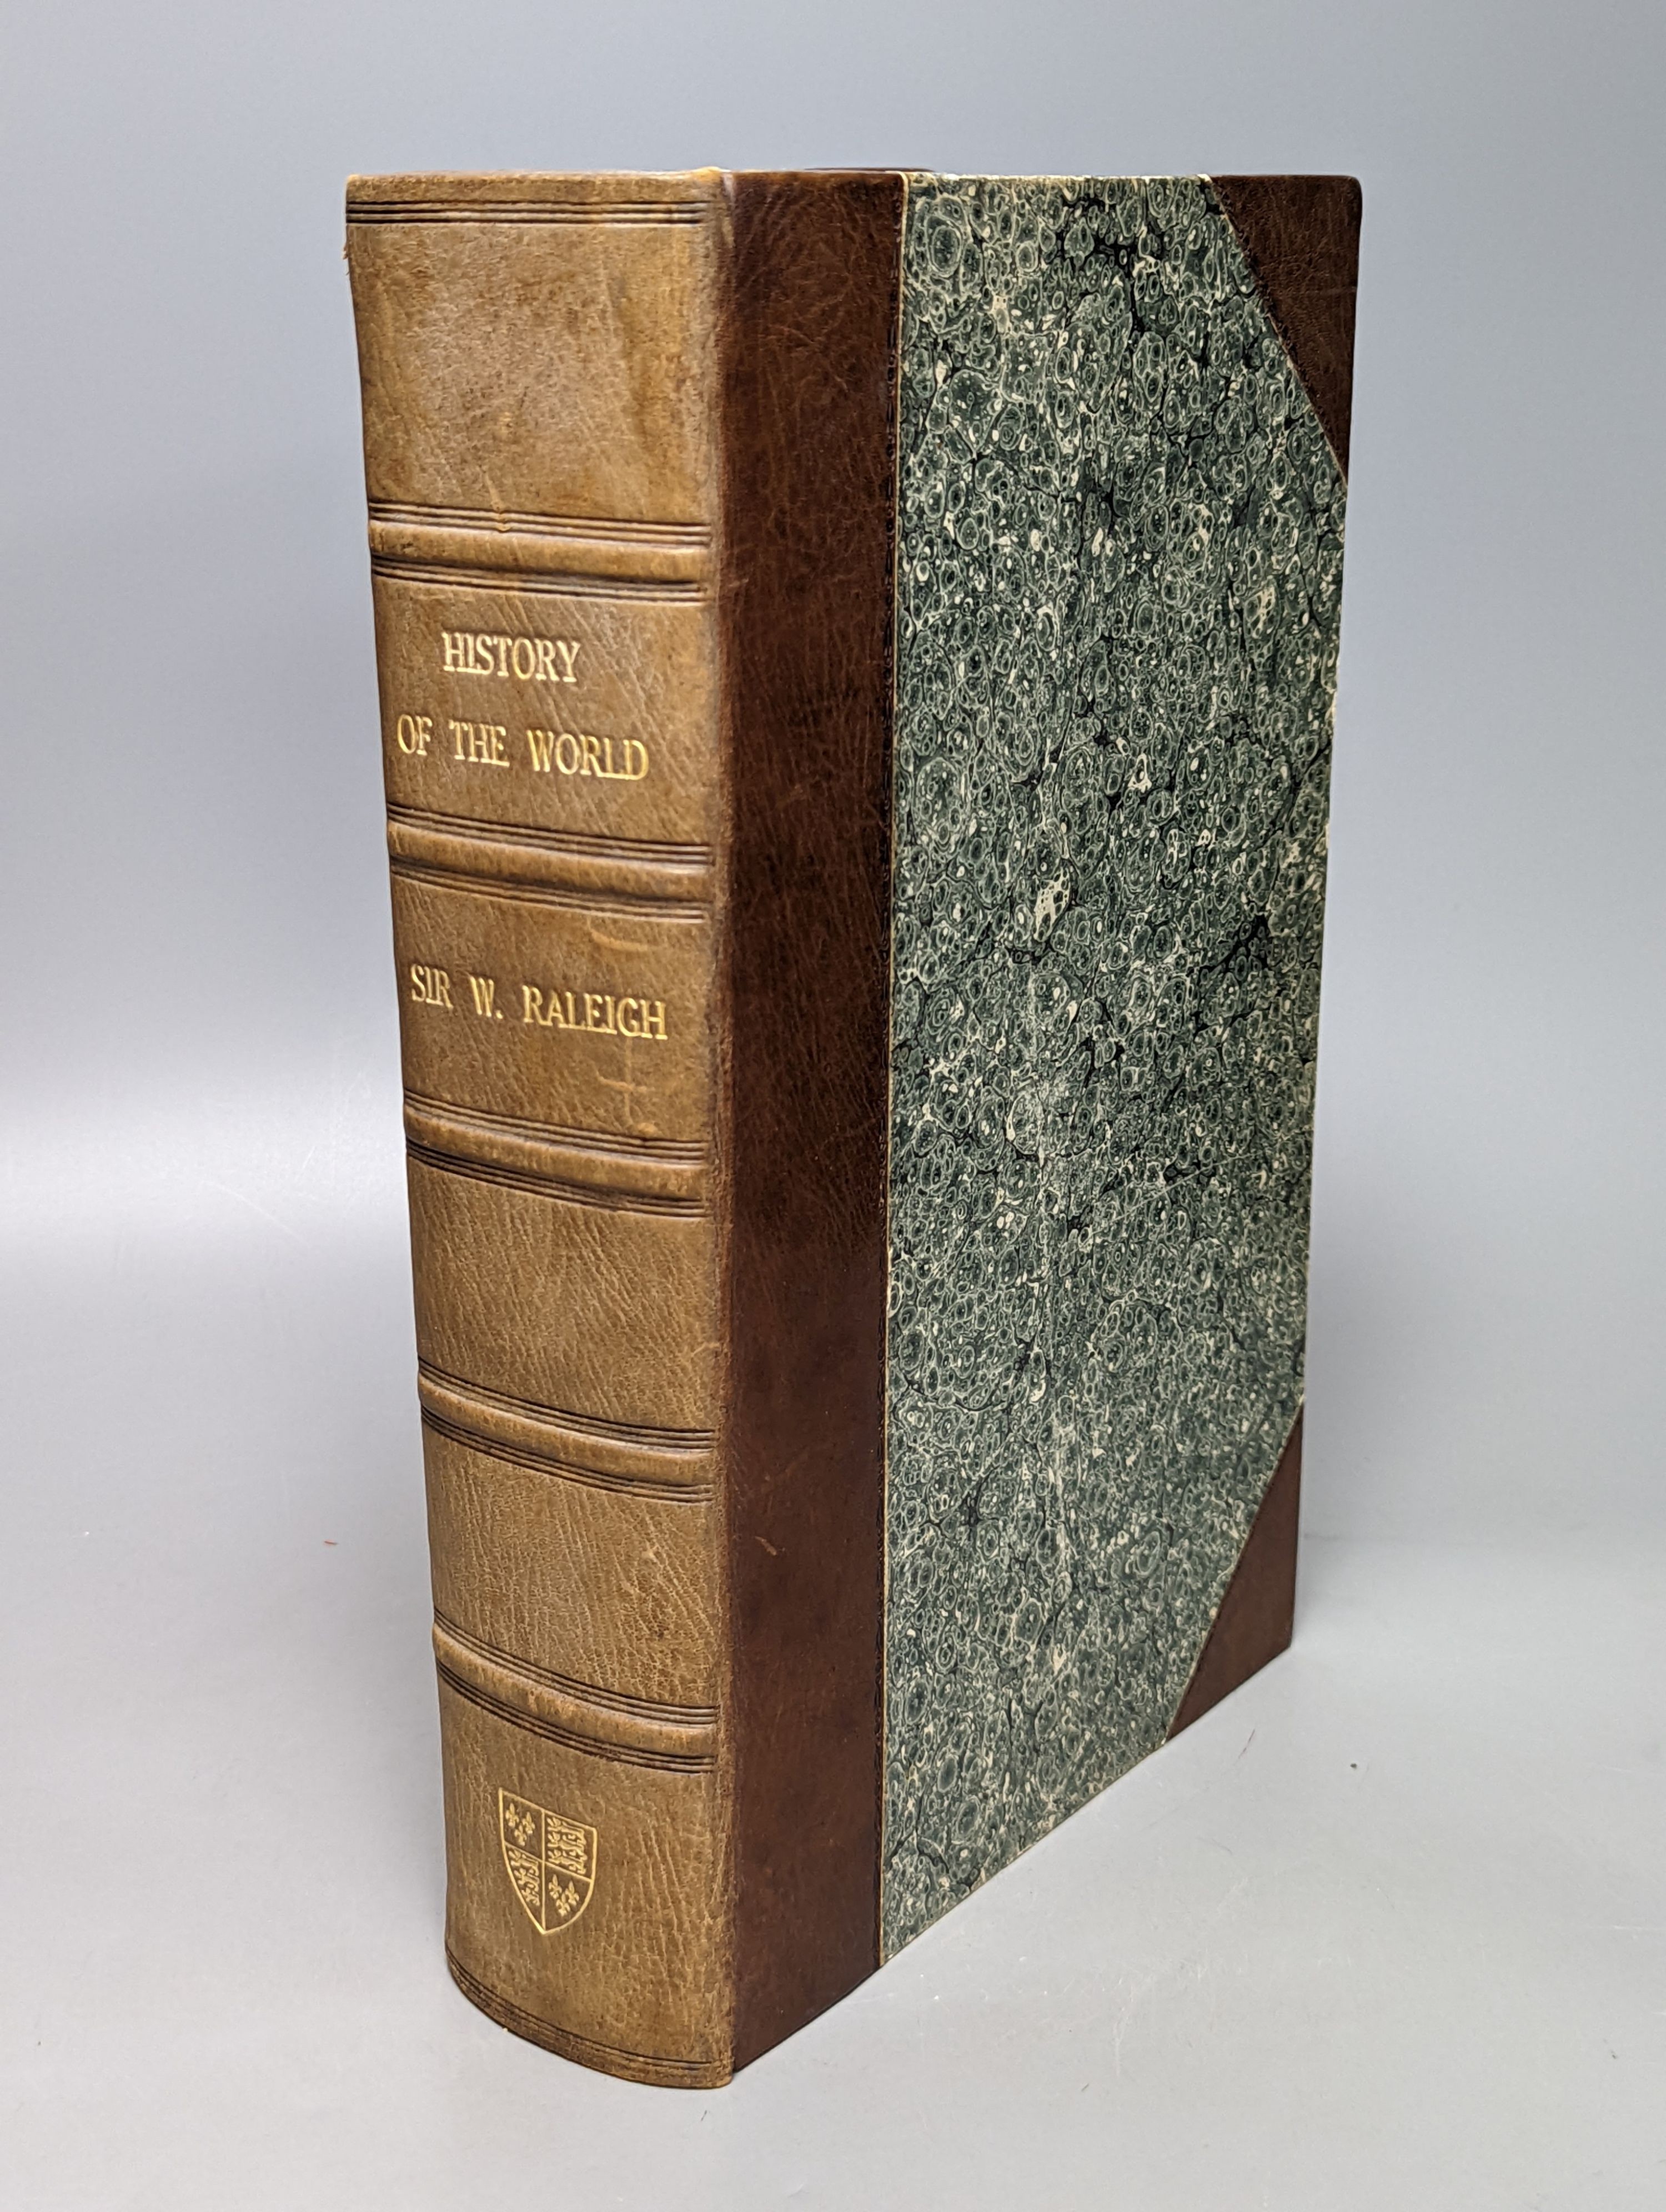 [Raleigh, Sir Walter - The Historie of the World] i.e. lacks printed title; present are the engraved title and the 'Mind of the Front' leaf, some contents pages, thereafter the Preface